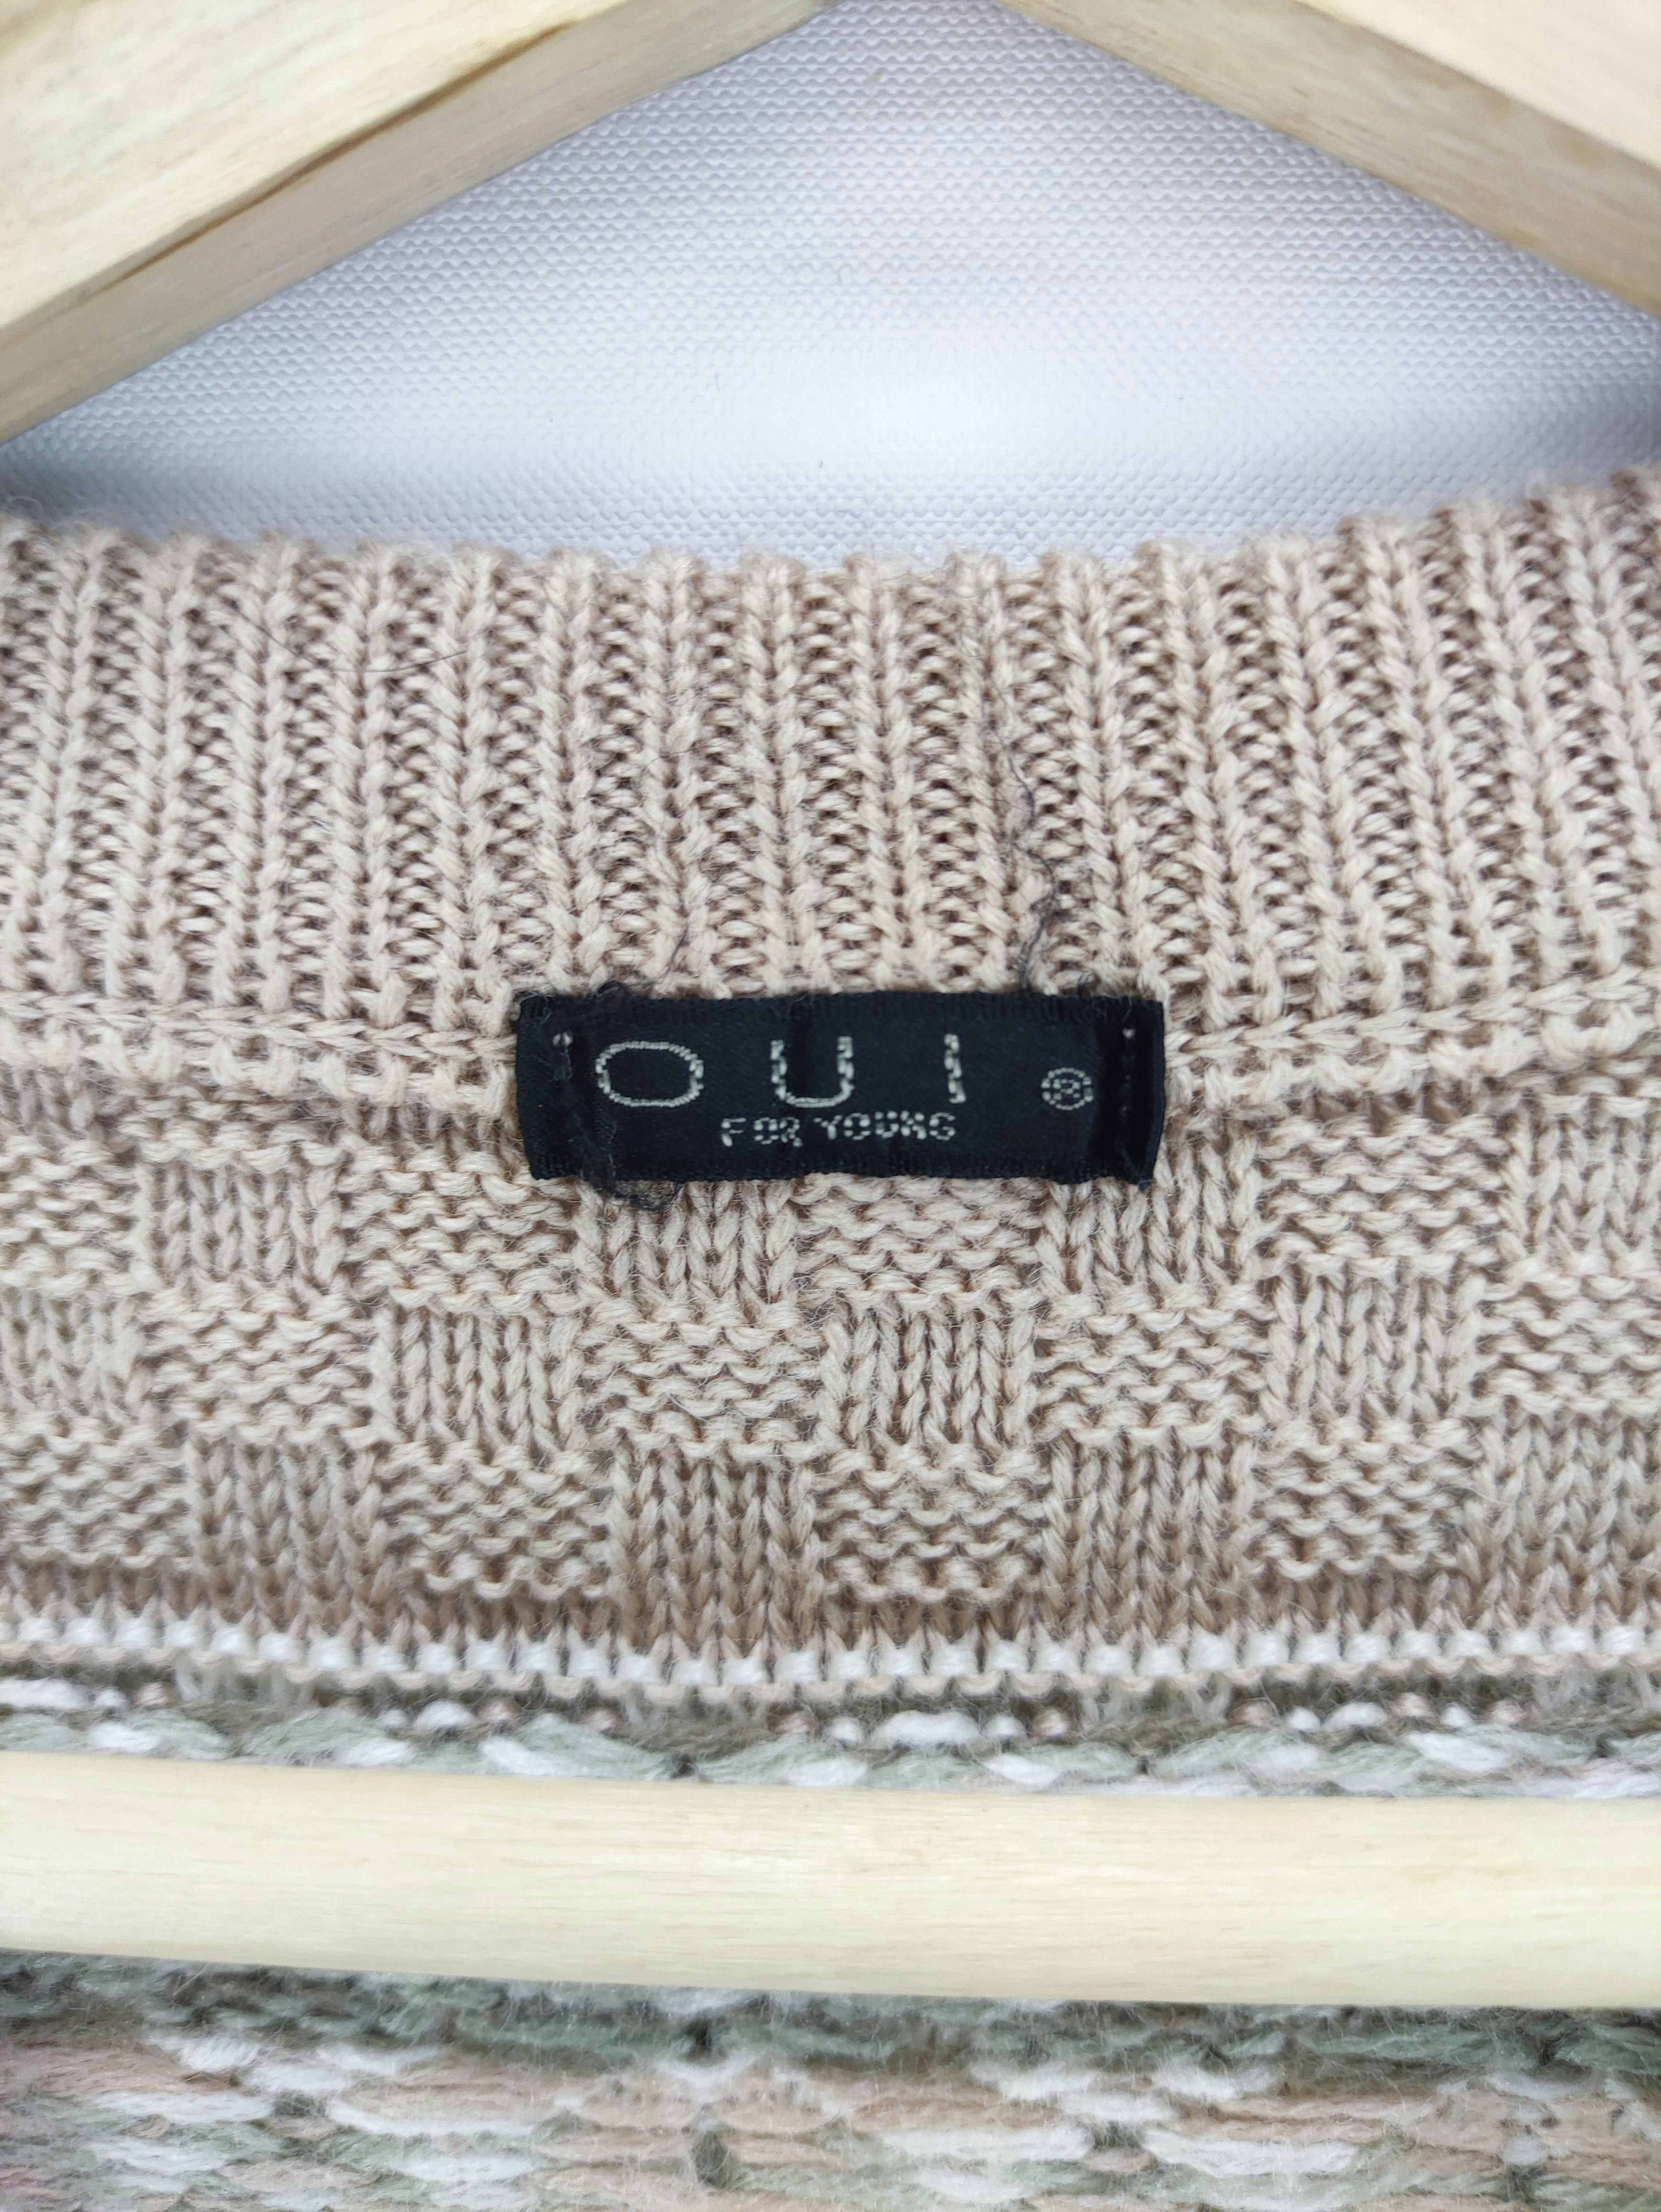 Japanese Brand - Vintage Cardigan knit Sweater By Oui - 2